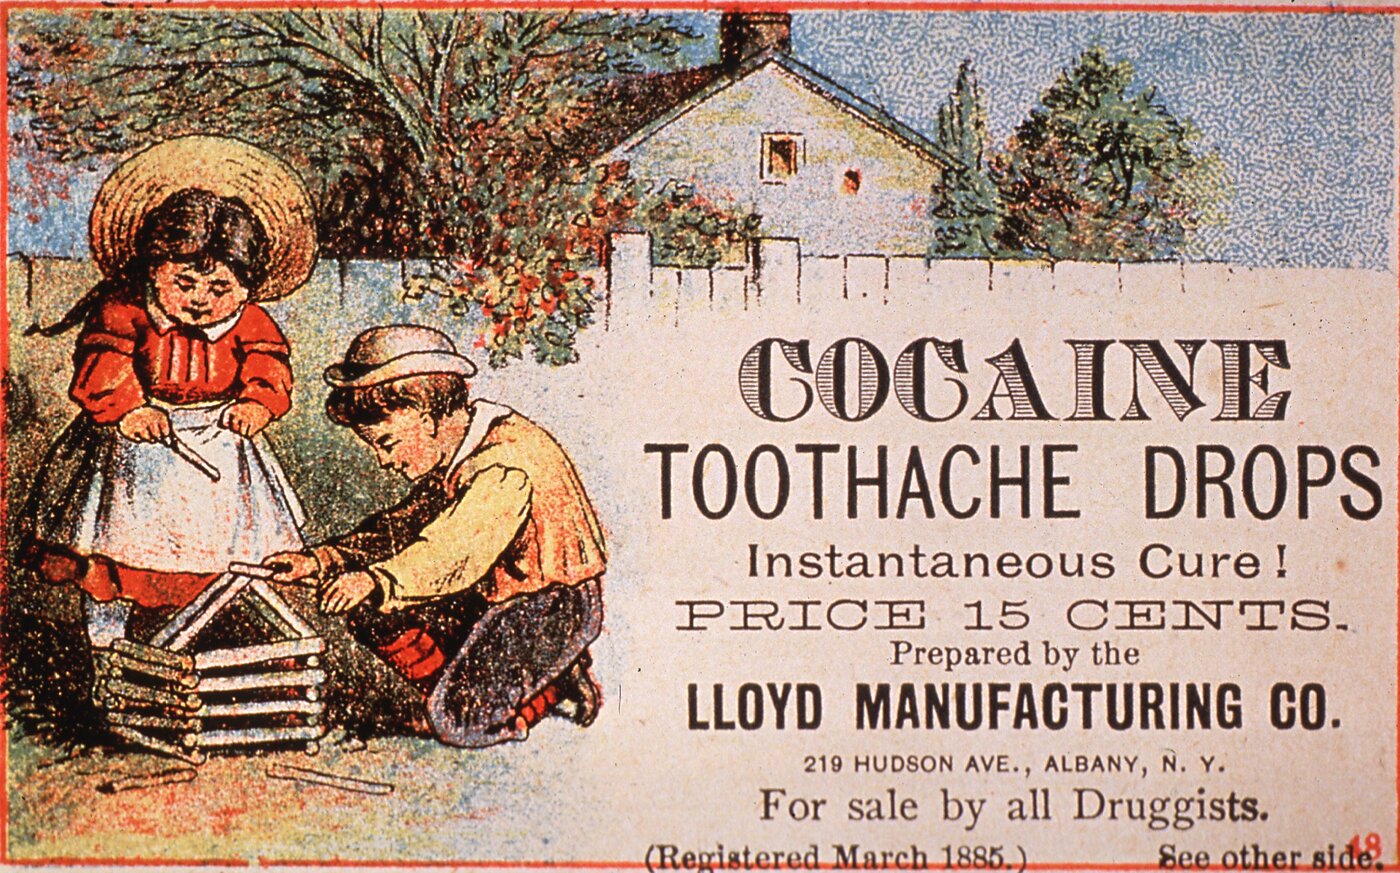 Advertisement for Cocaine Toothache Drops, claiming an "instantaneous cure," featuring two children playing outside.